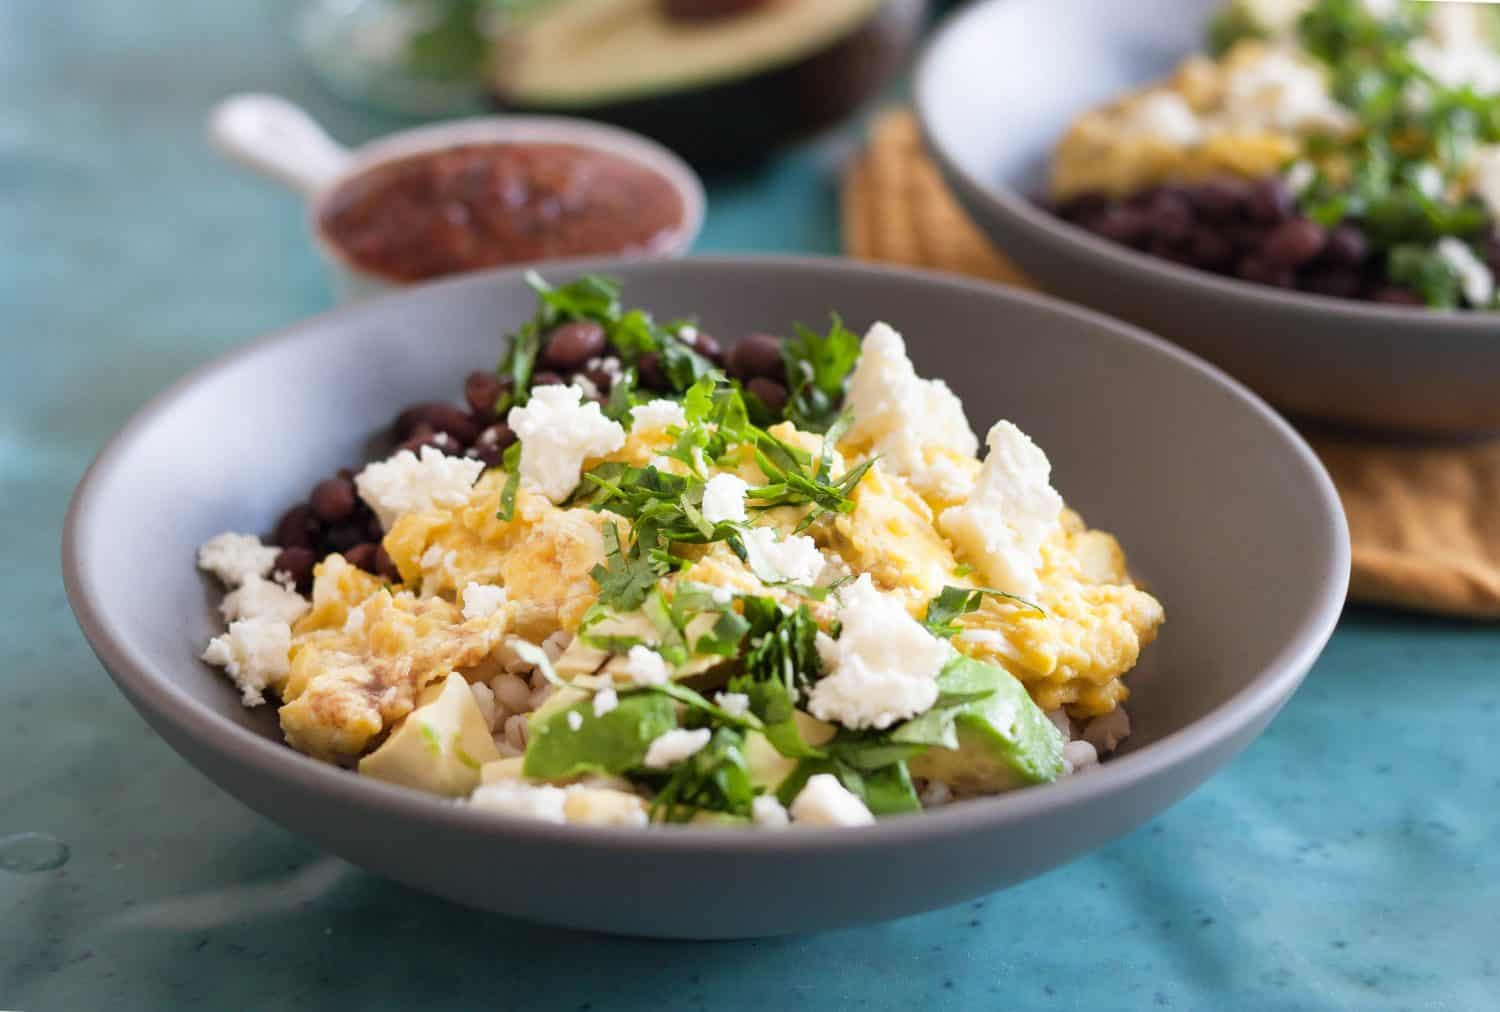 Filling and easy to prepare, these hearty Southwestern Barley Breakfast Bowls make a great whole foods breakfast option. * GoodieGodmother.com